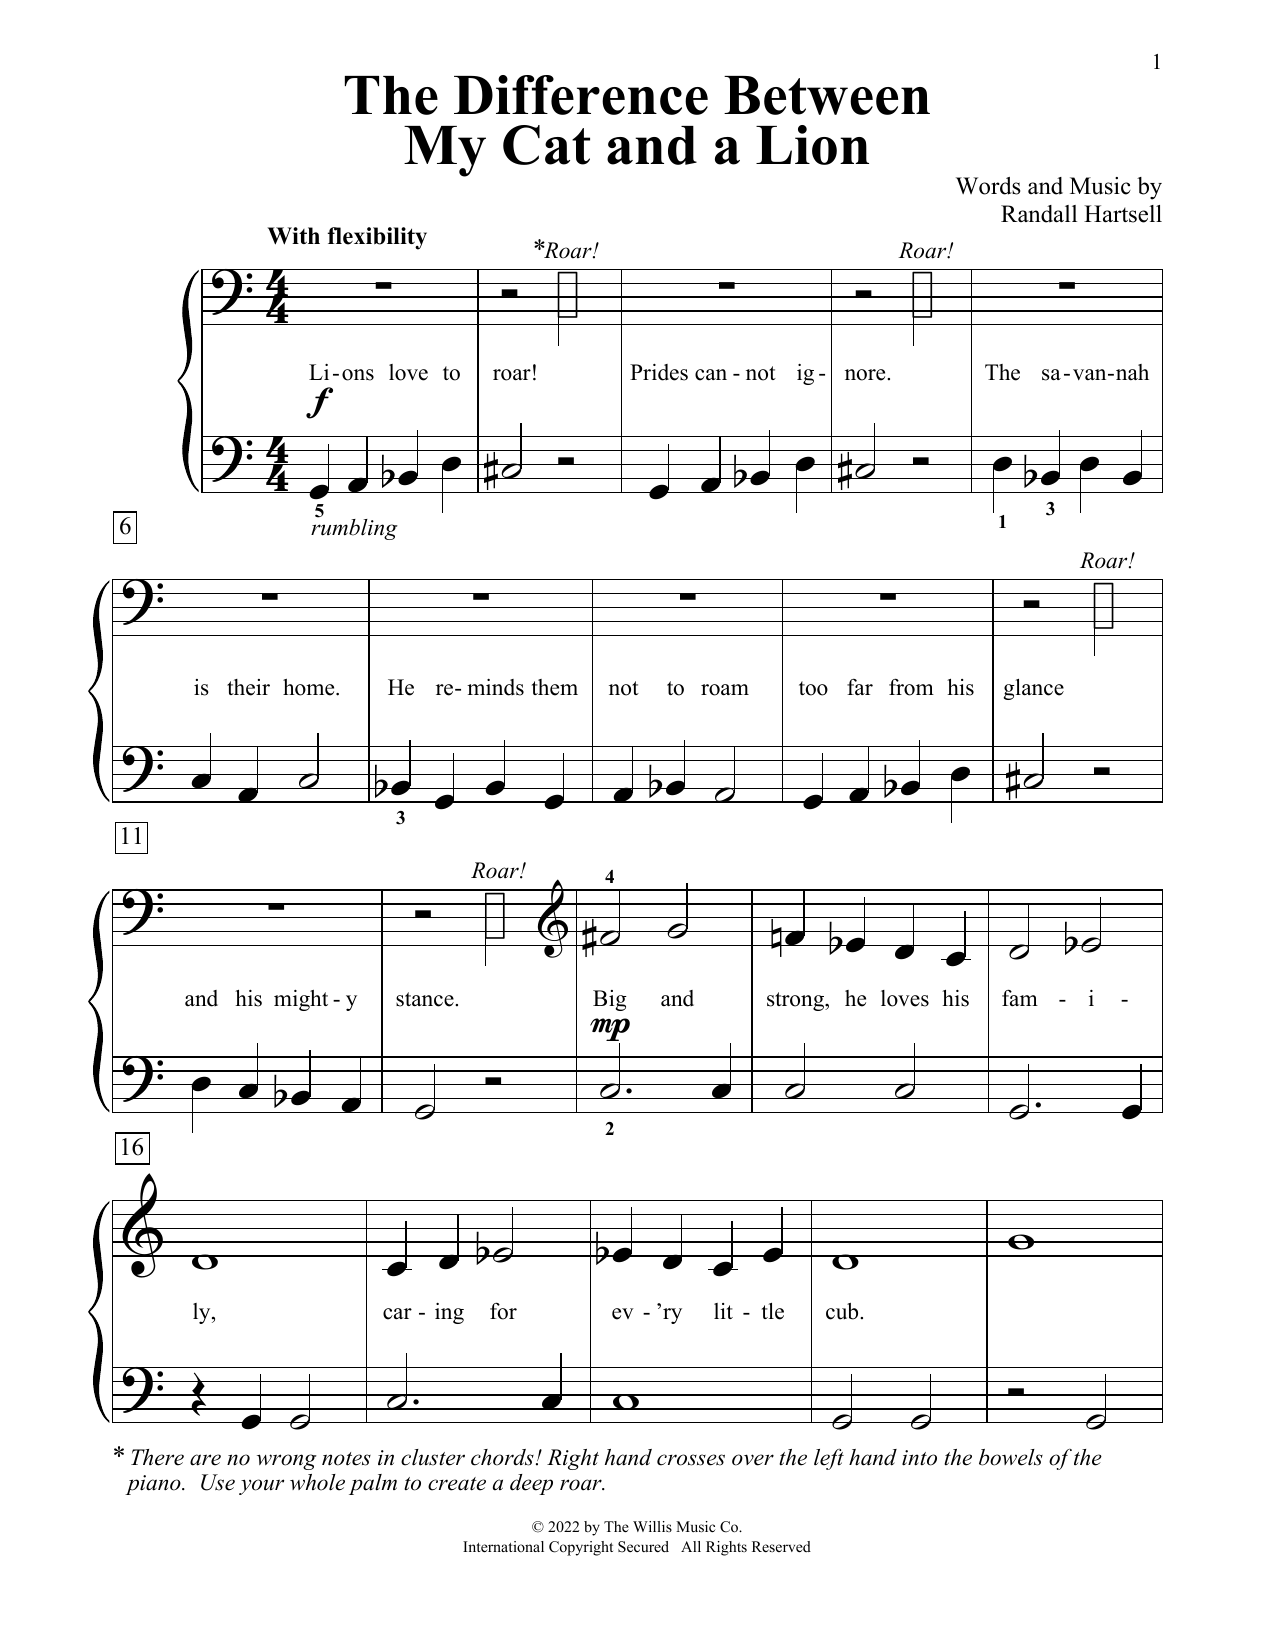 Download Randall Hartsell The Difference Between My Cat And A Lio Sheet Music